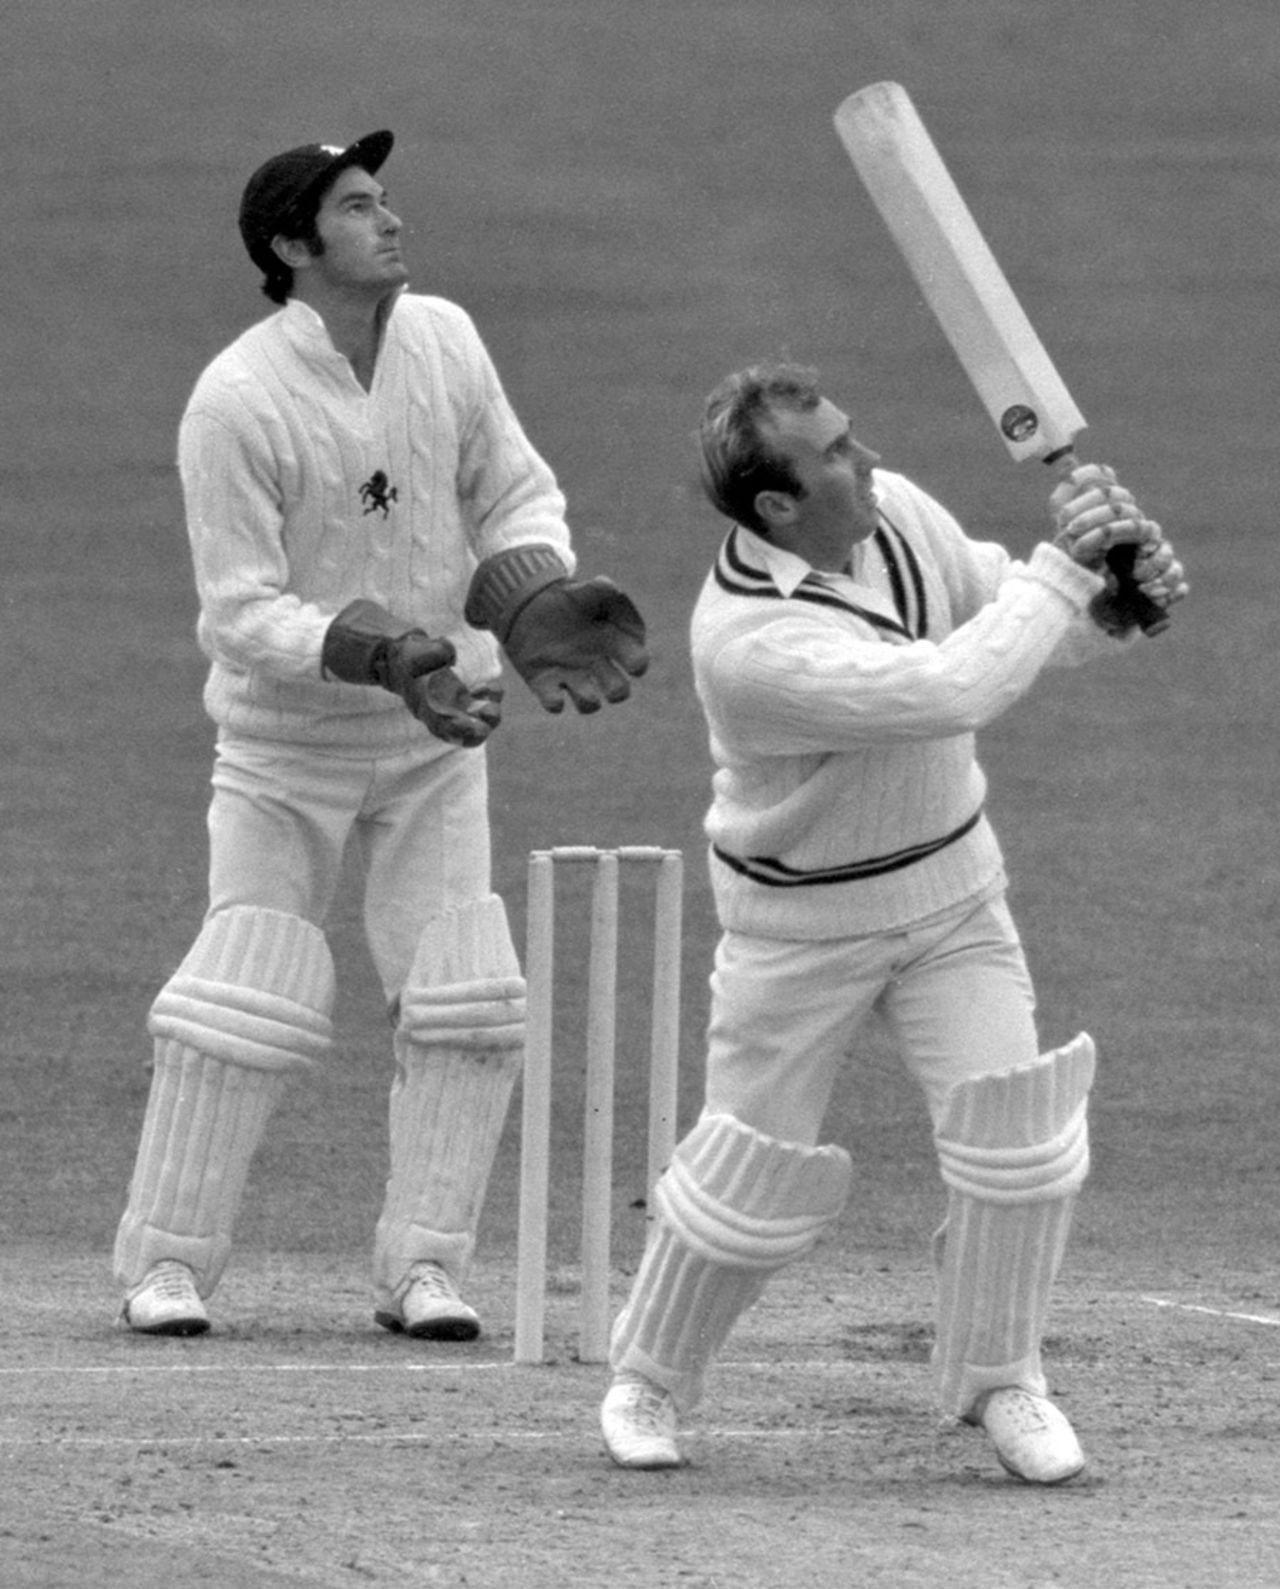 Neal Abberley on his way to 19, Kent v Warwickshire, Gravesend, May 18, 1970